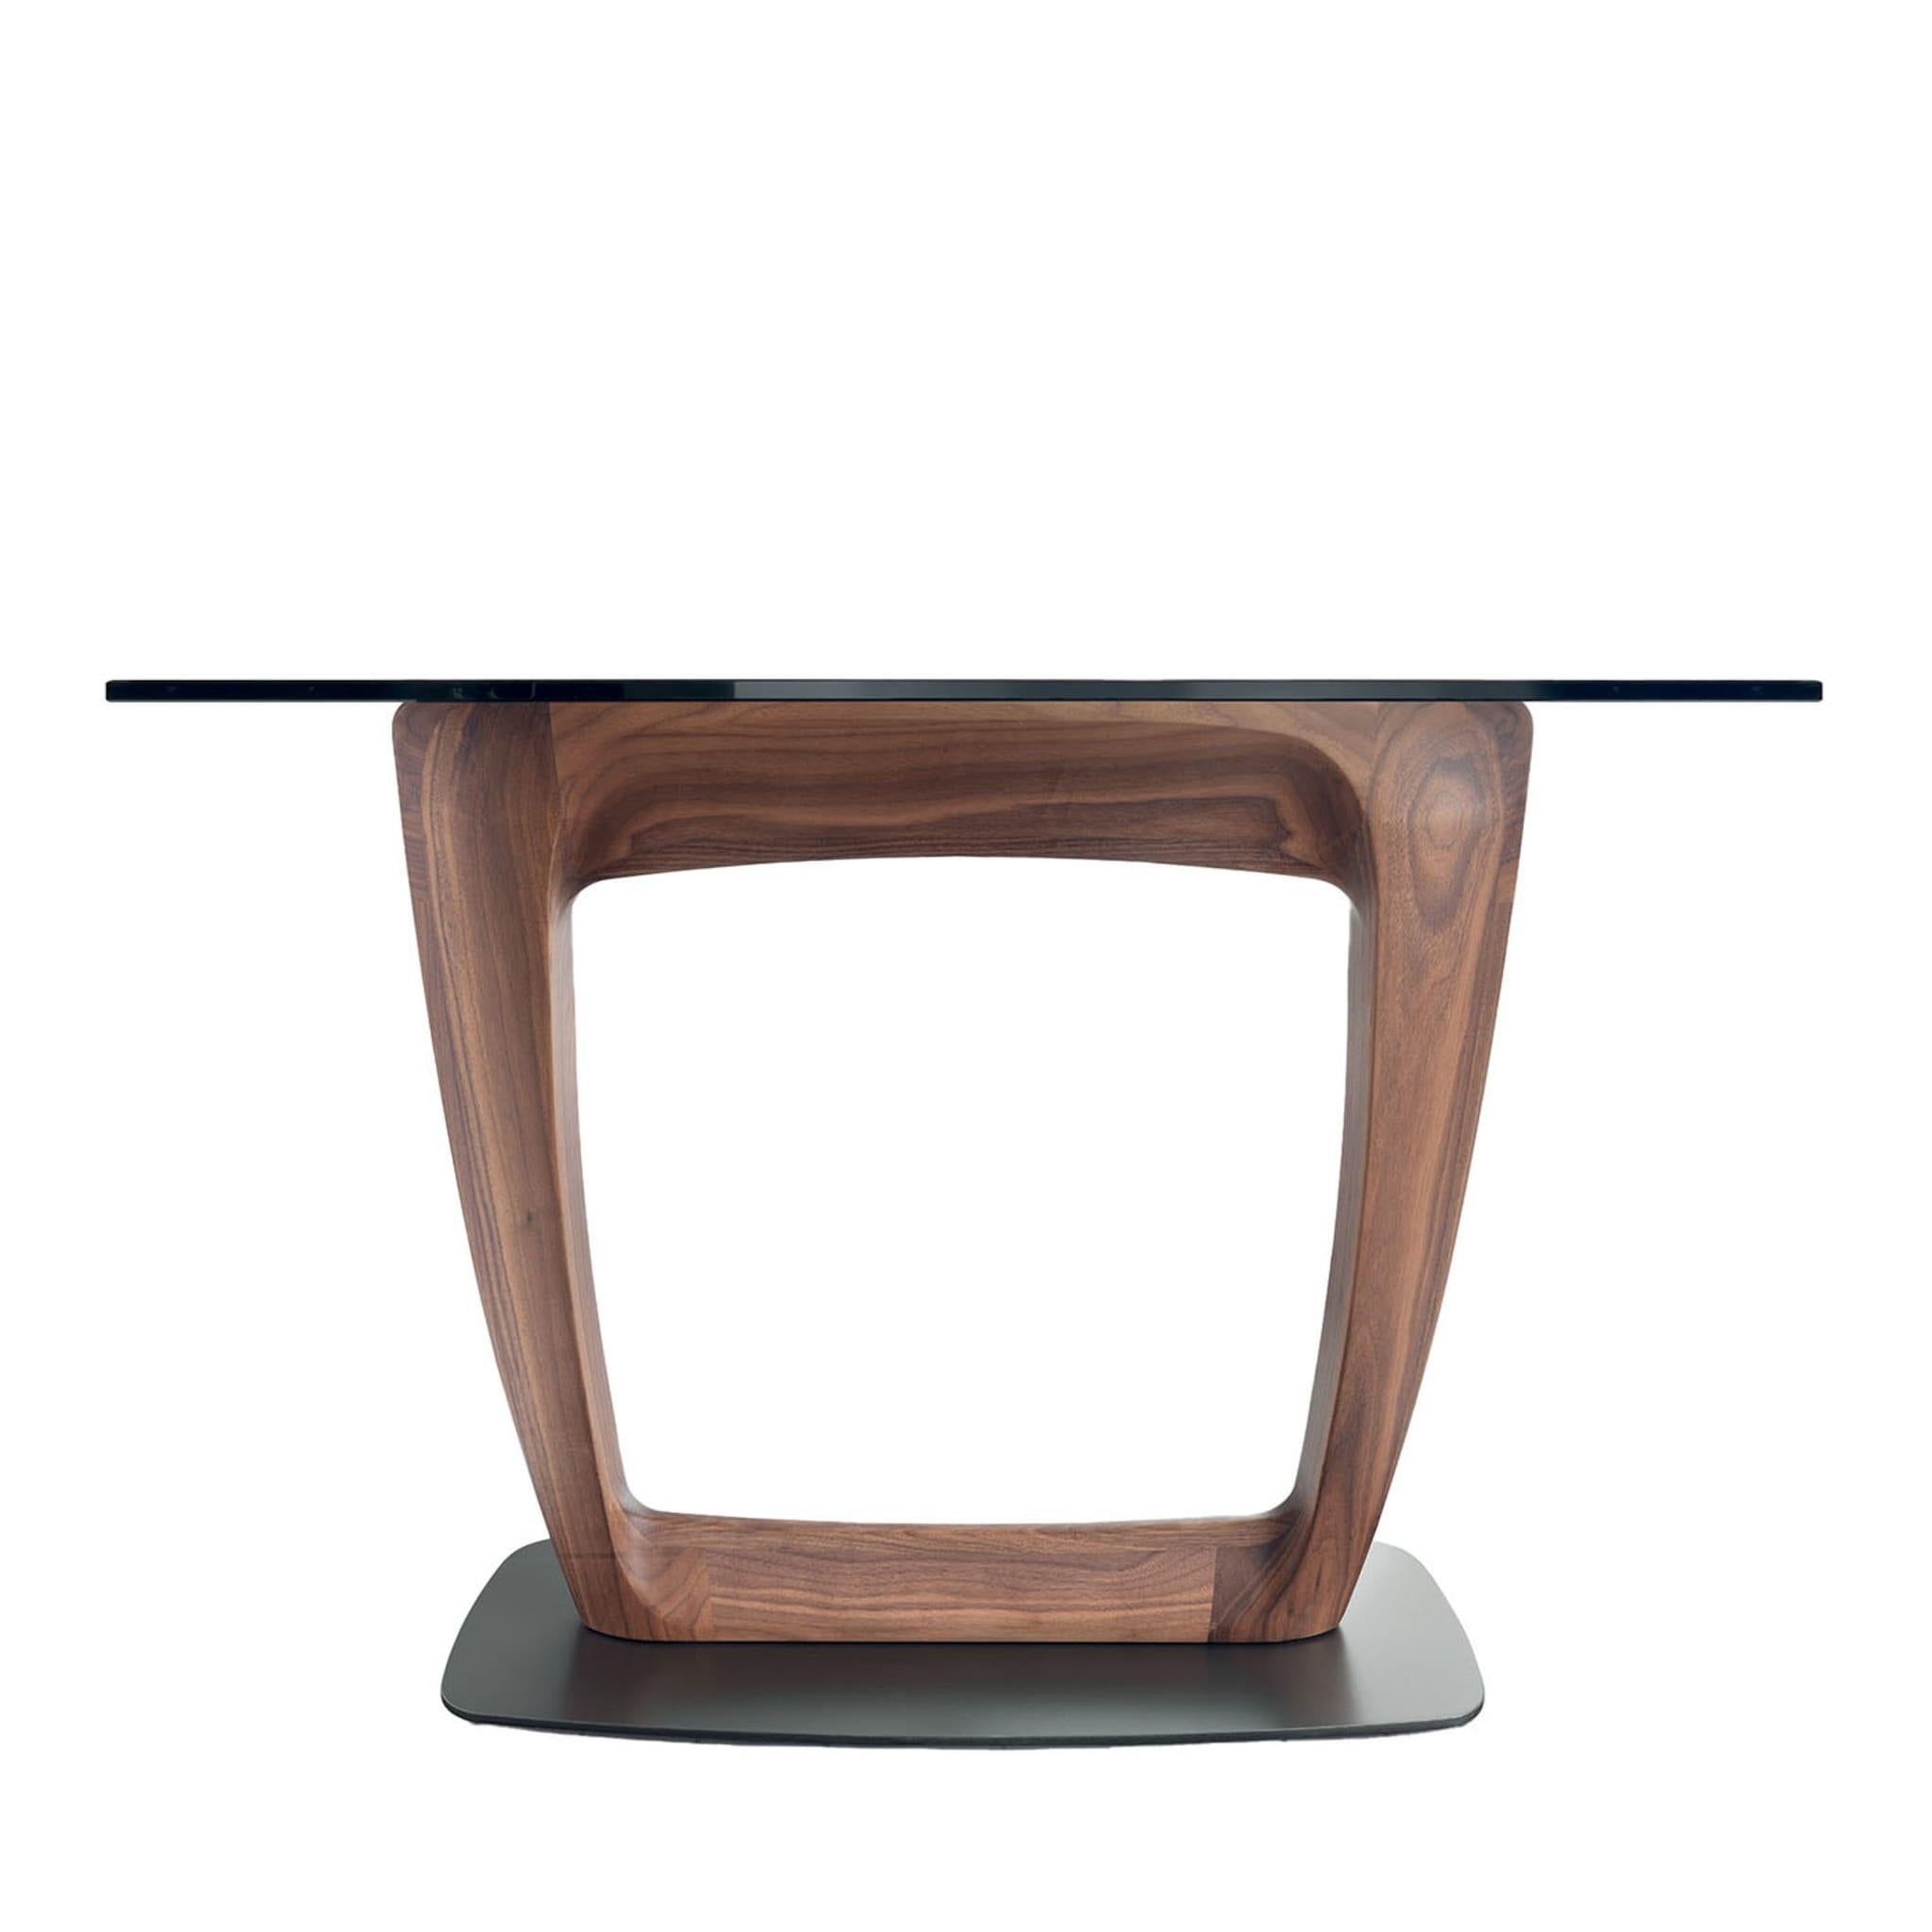 Designed by Stefano Bigi, this bold console table will make a striking statement in a contemporary, industrial, or rustic-inspired decor. The table top (10 or 12mm thick) is welded to a solid Canaletto walnut base distinguished by a bold,